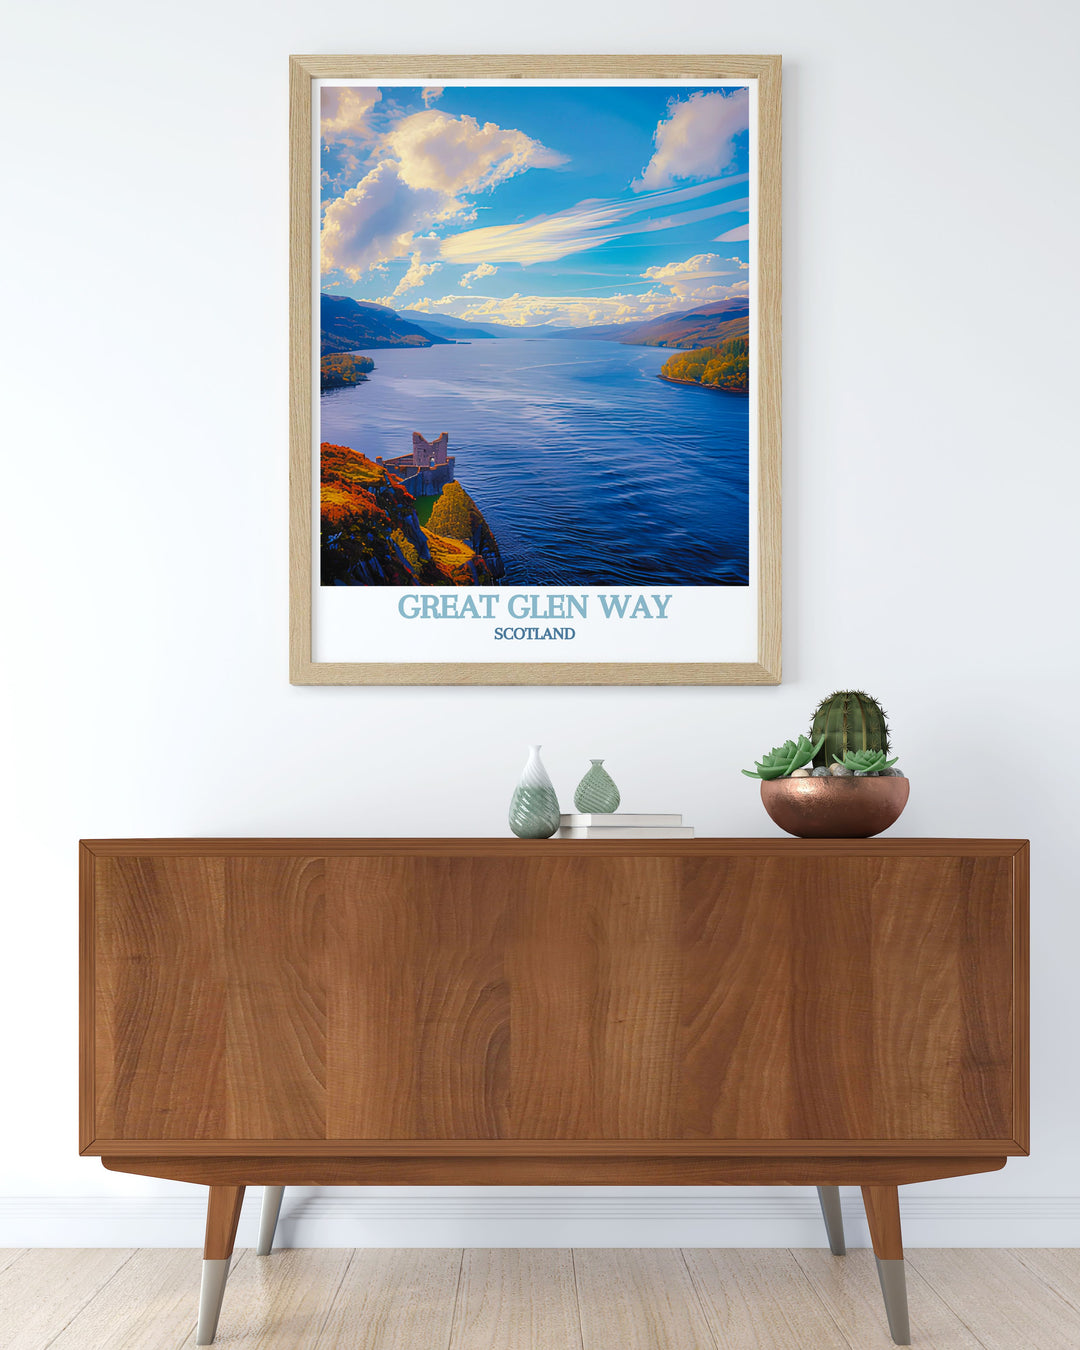 Showcasing the iconic Loch Ness, this travel poster offers a captivating view of Scotlands legendary loch, making it an intriguing addition for any space and ideal for those fascinated by natural mysteries.